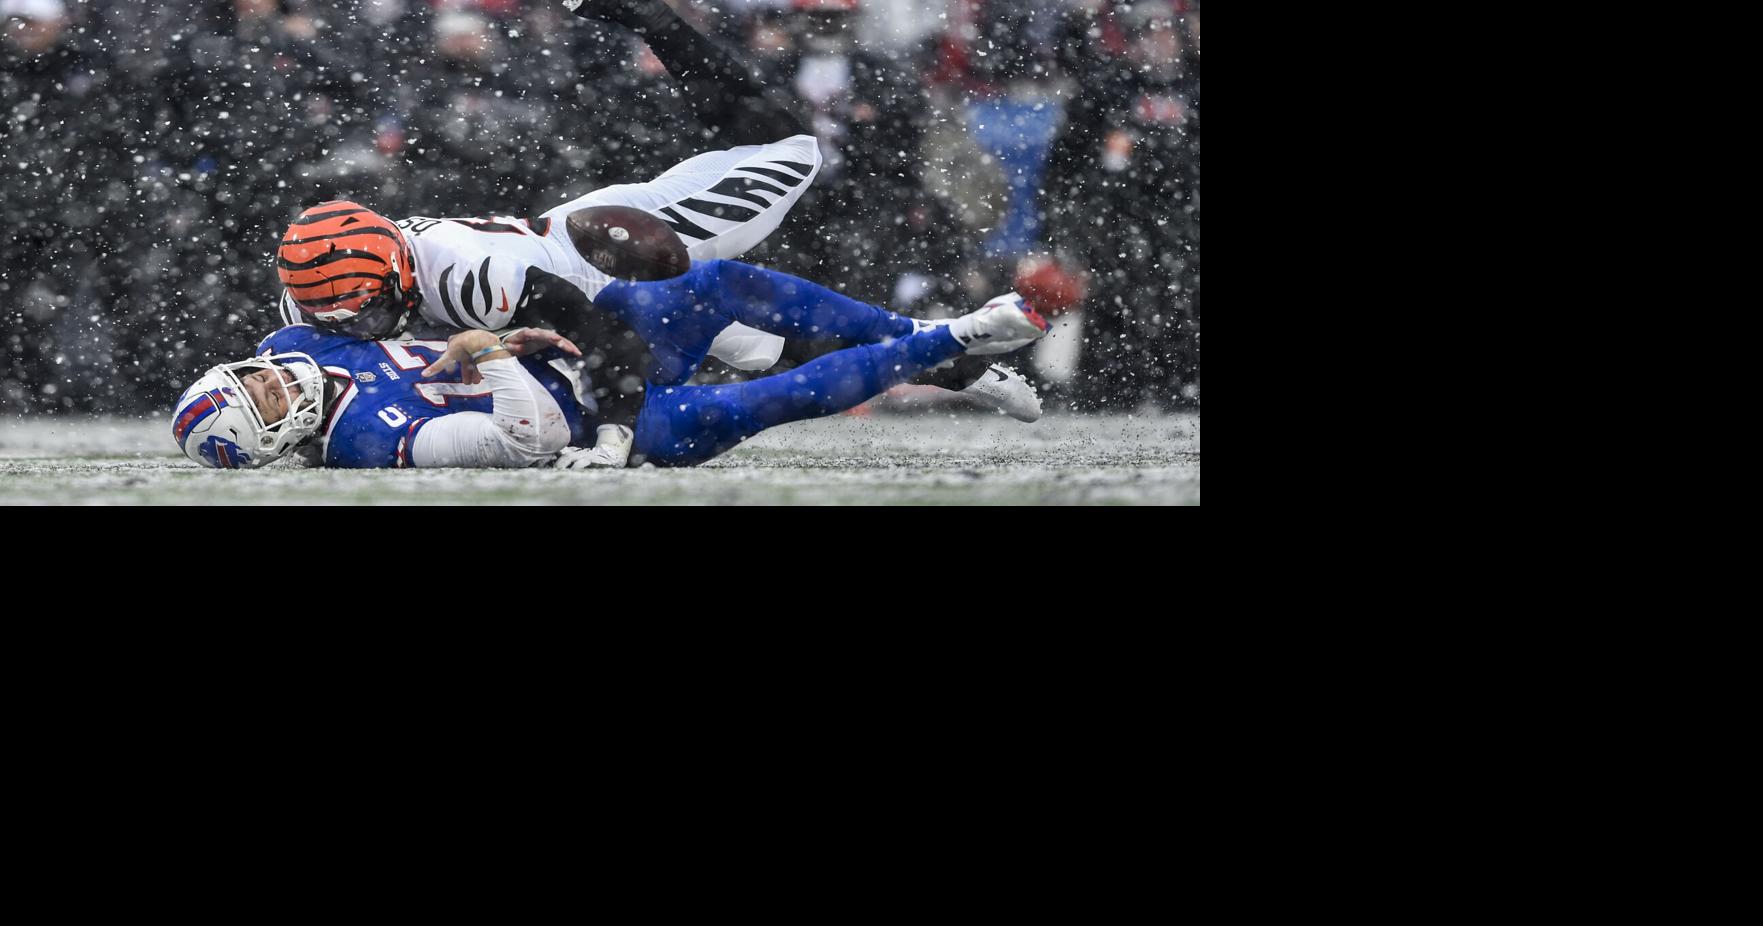 Bengals win in snowy Buffalo, advance to AFC title game for rematch with KC